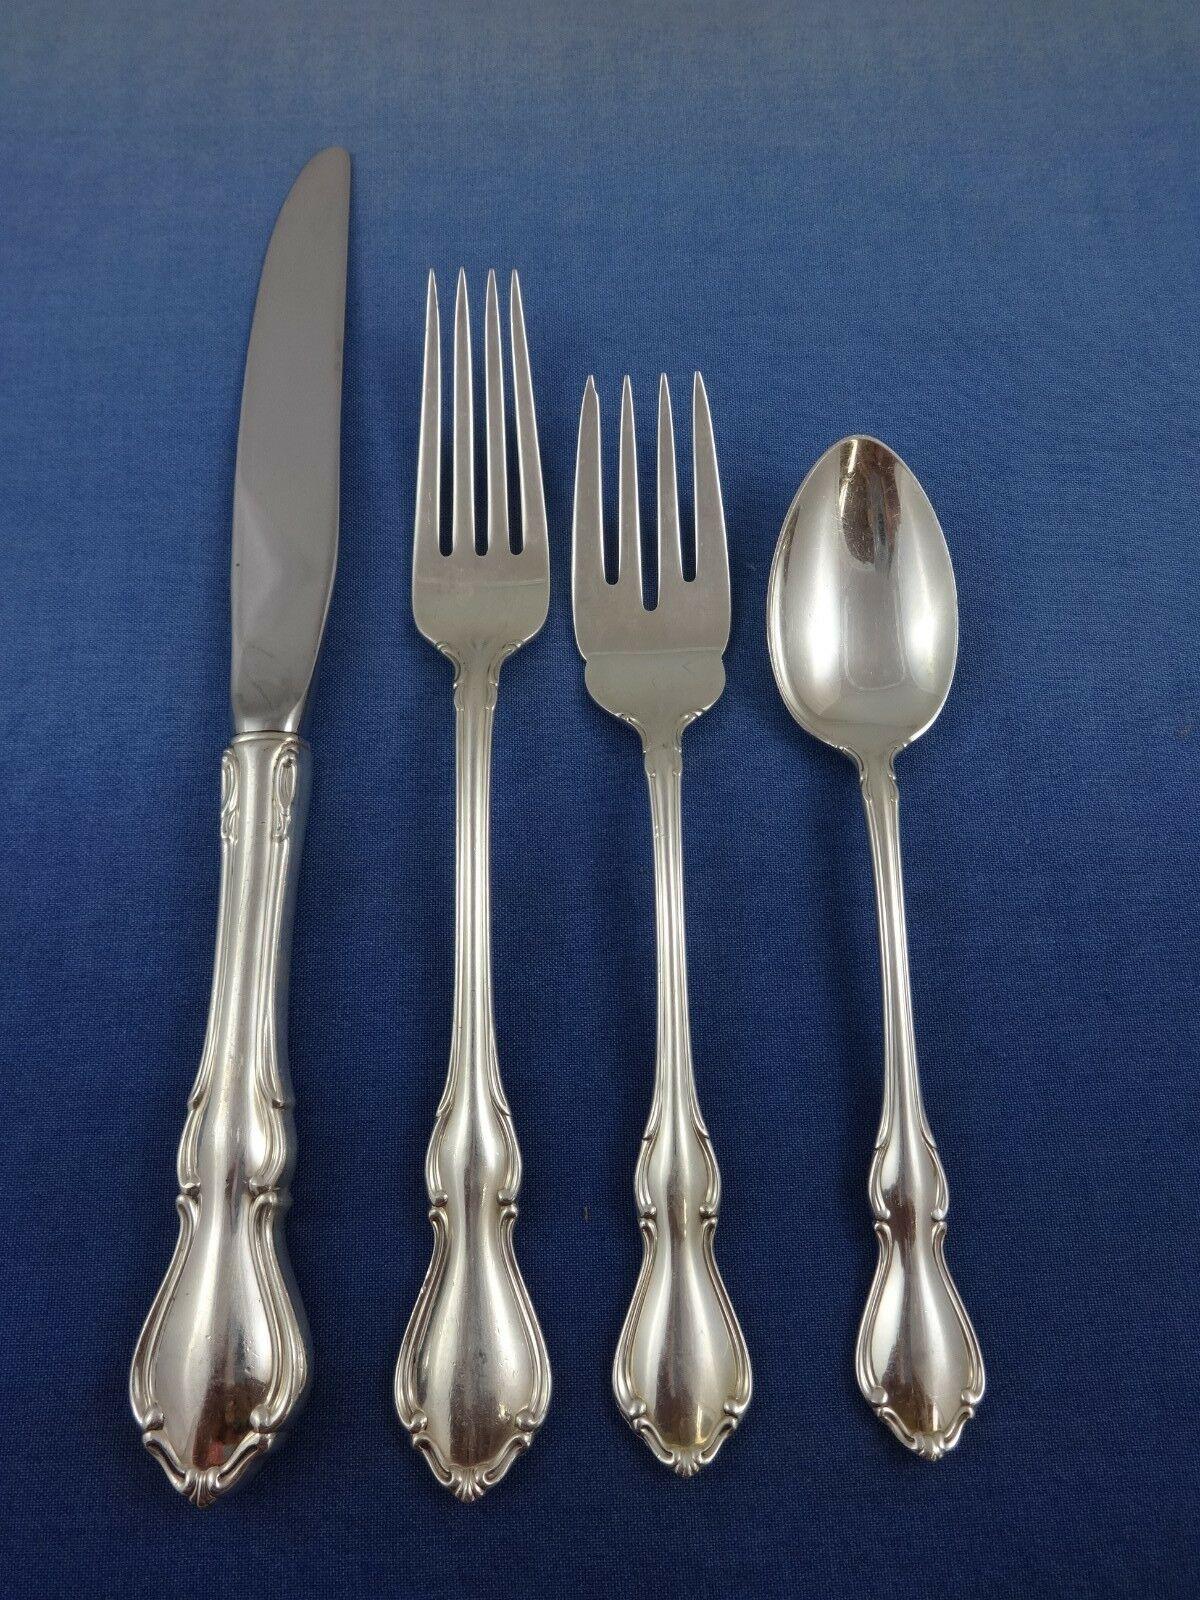 Hampton Court by Reed & Barton sterling silver Flatware set - 65 pieces. This set includes:

12 knives, 9 1/8